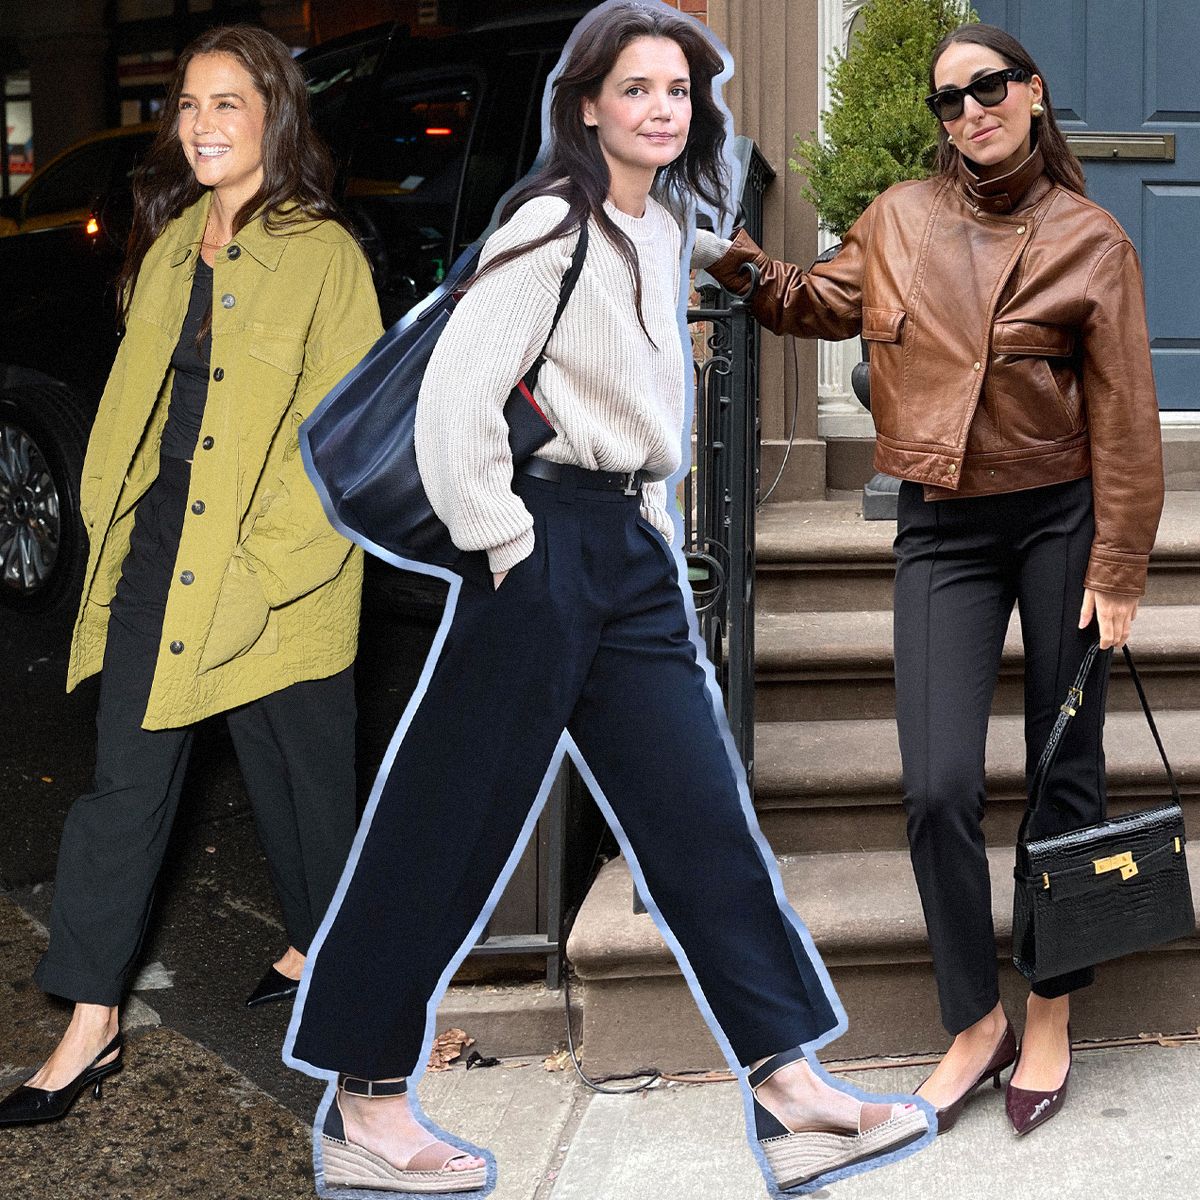 Katie Holmes and I Both Swear By This Brand's Anti-Trend Staples—6 I Deemed Worthy of Investment